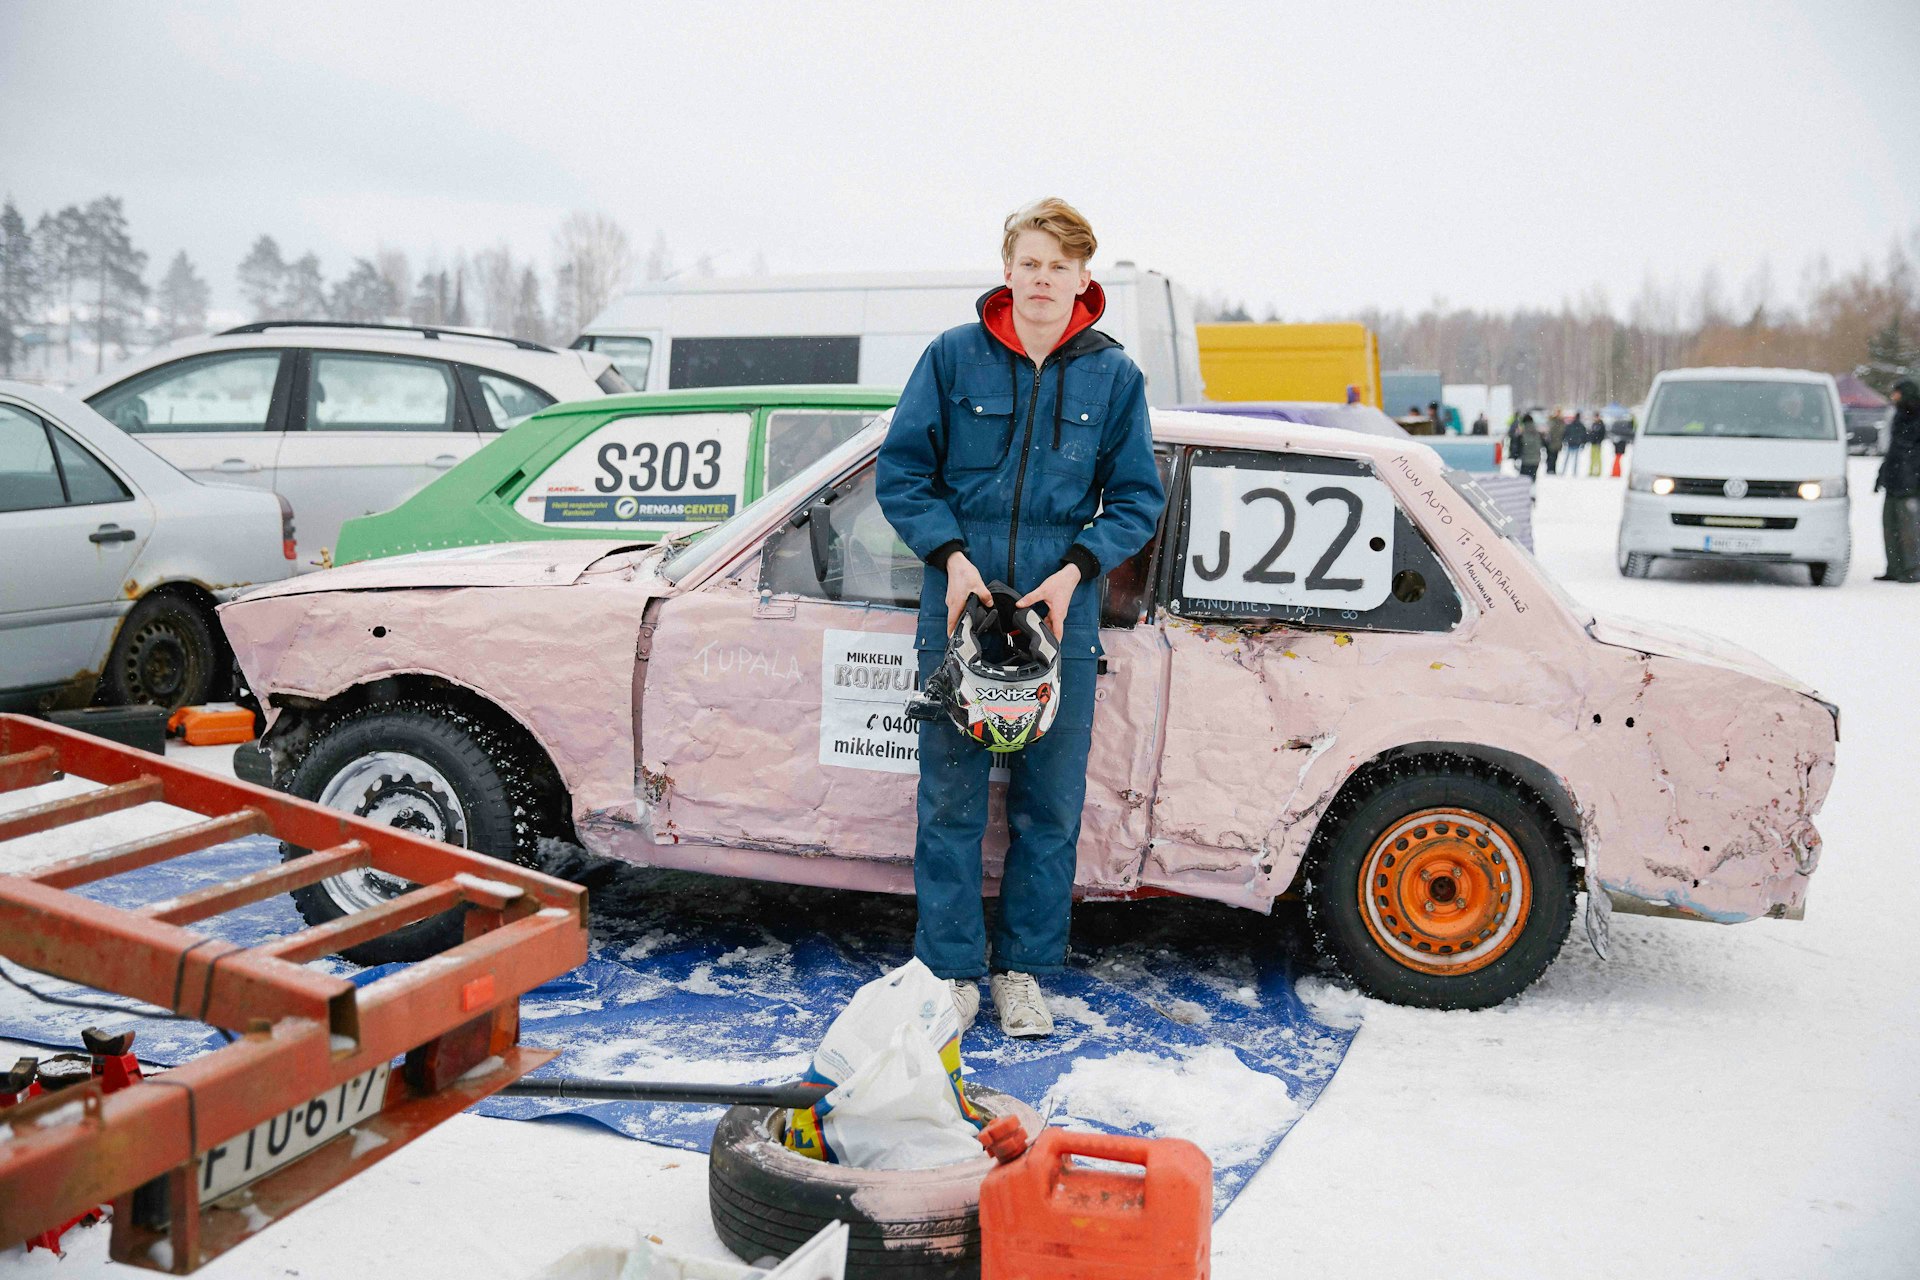 Having been unable to fix his car in time, Eetu borrows another car – affectionately known as 'the pink monster' – before a race.